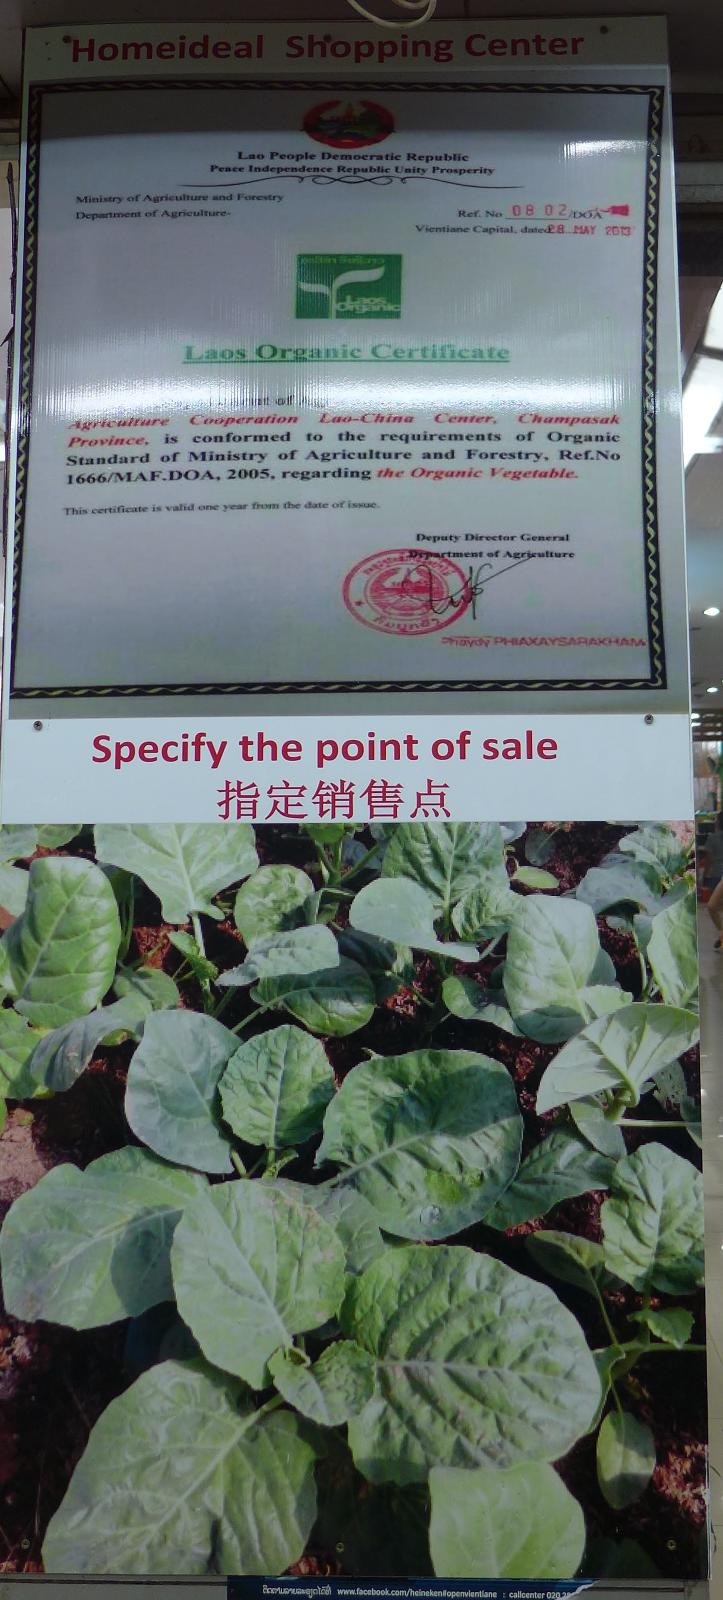 Specify the Point of Sale